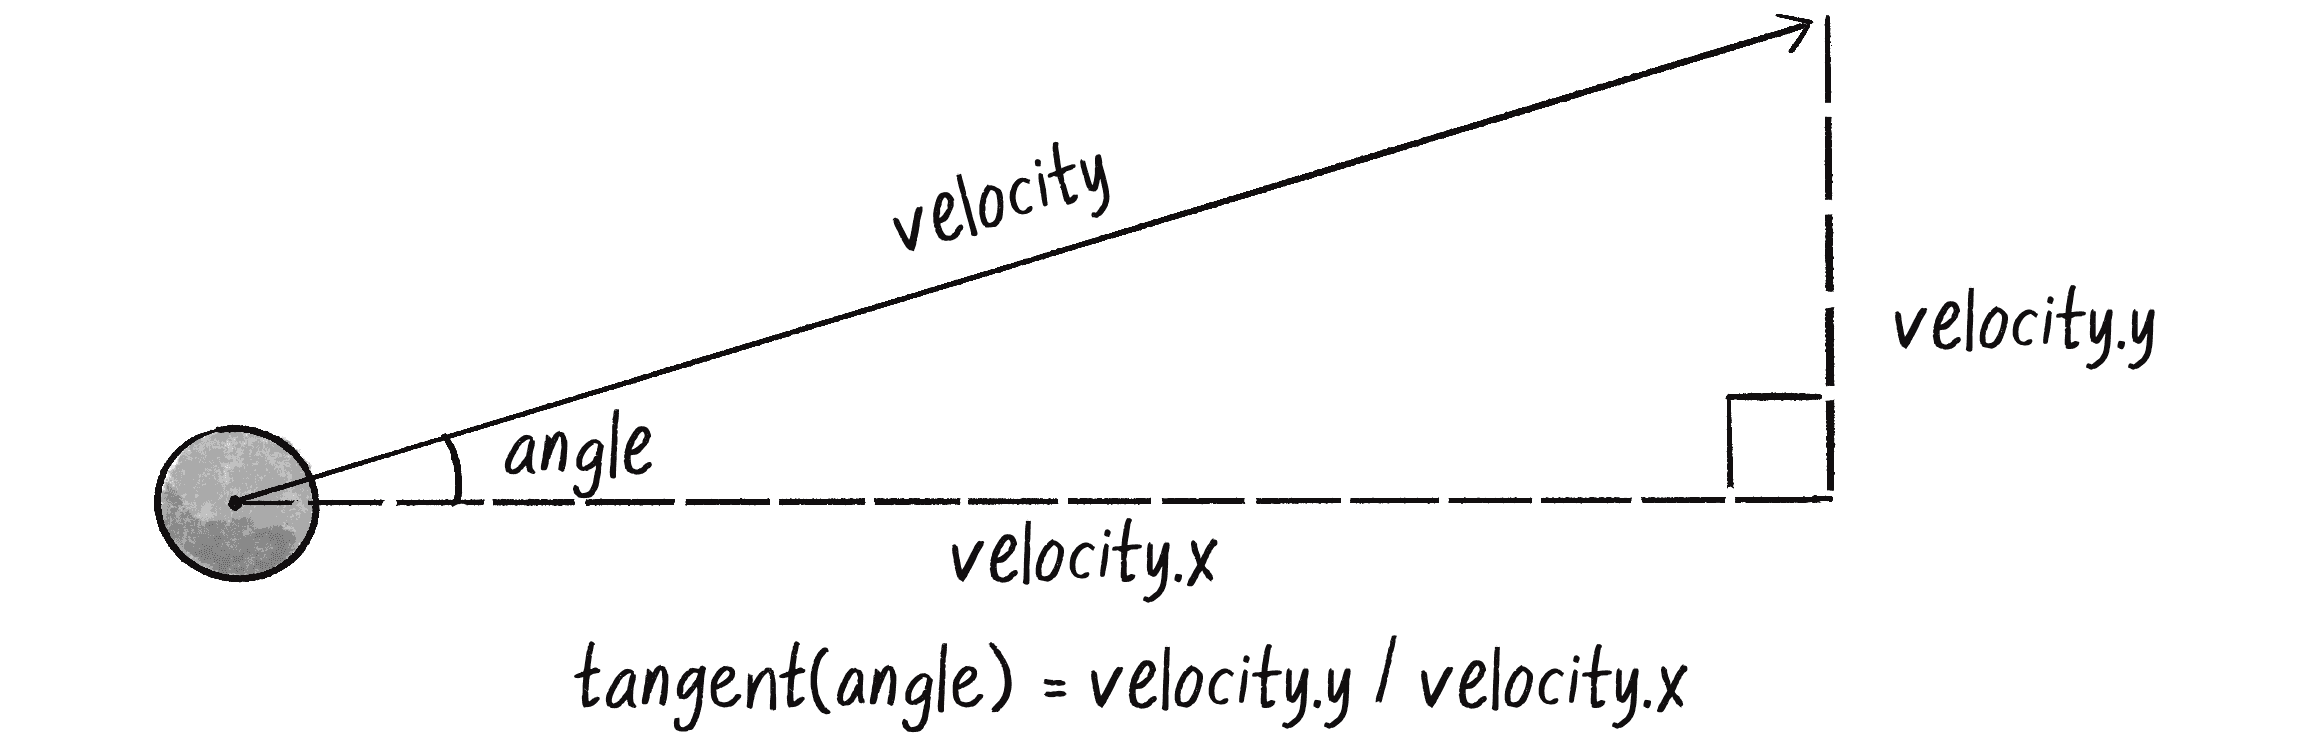 Figure 3.7: The tangent of a velocity vector’s angle is y divided by x.